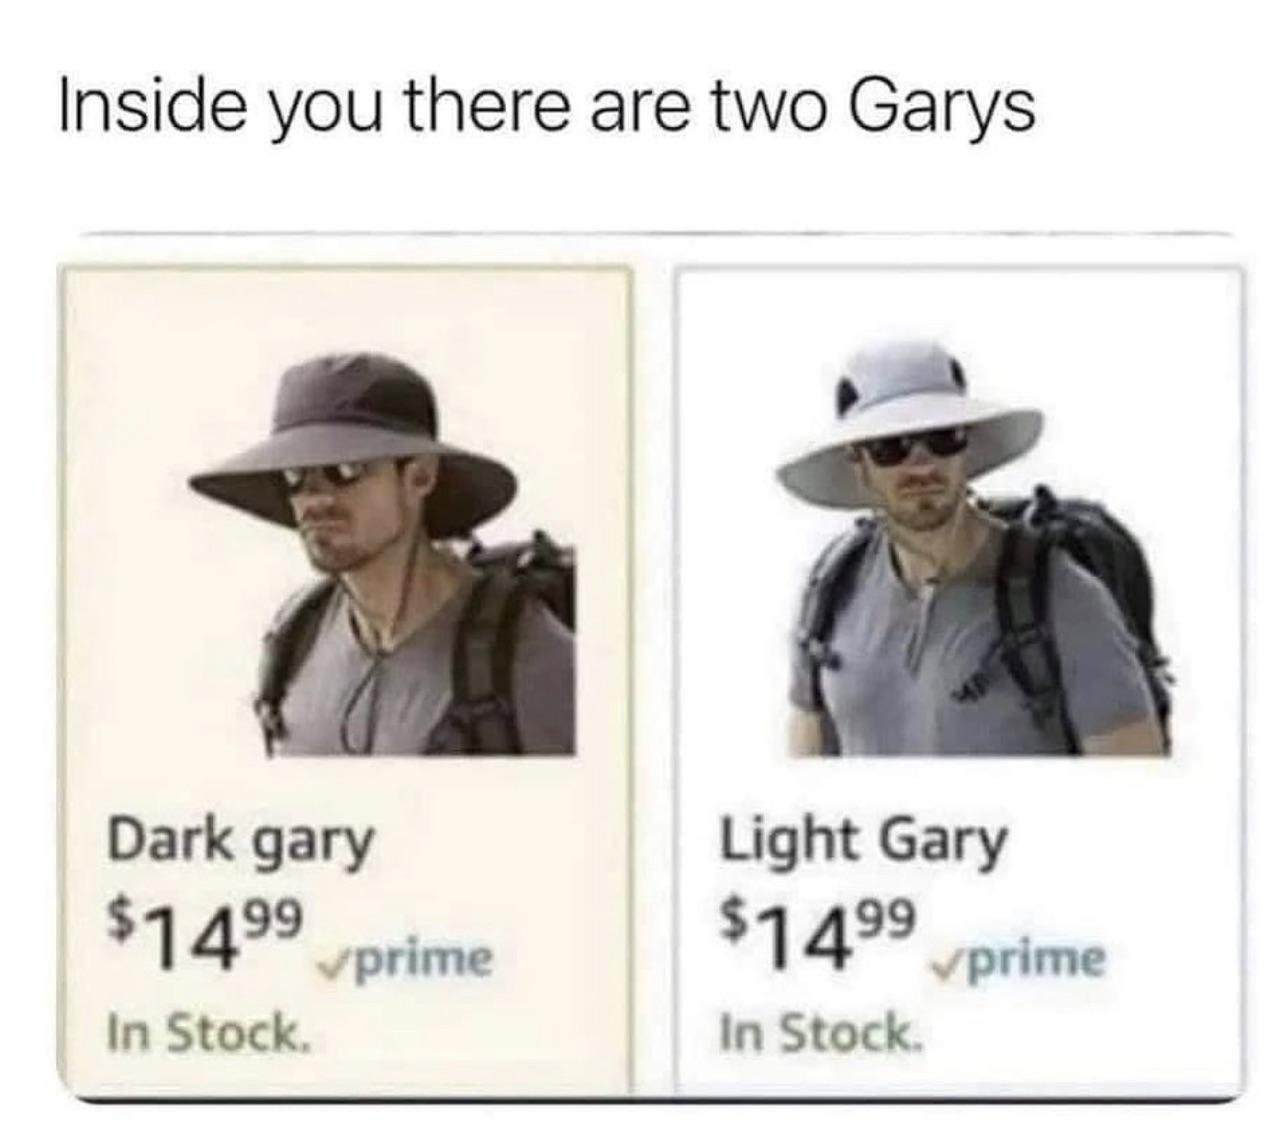 dank memes - fashion accessory - Inside you there are two Garys Dark gary 99 $149 prime In Stock. Light Gary $14. prime 99 In Stock.